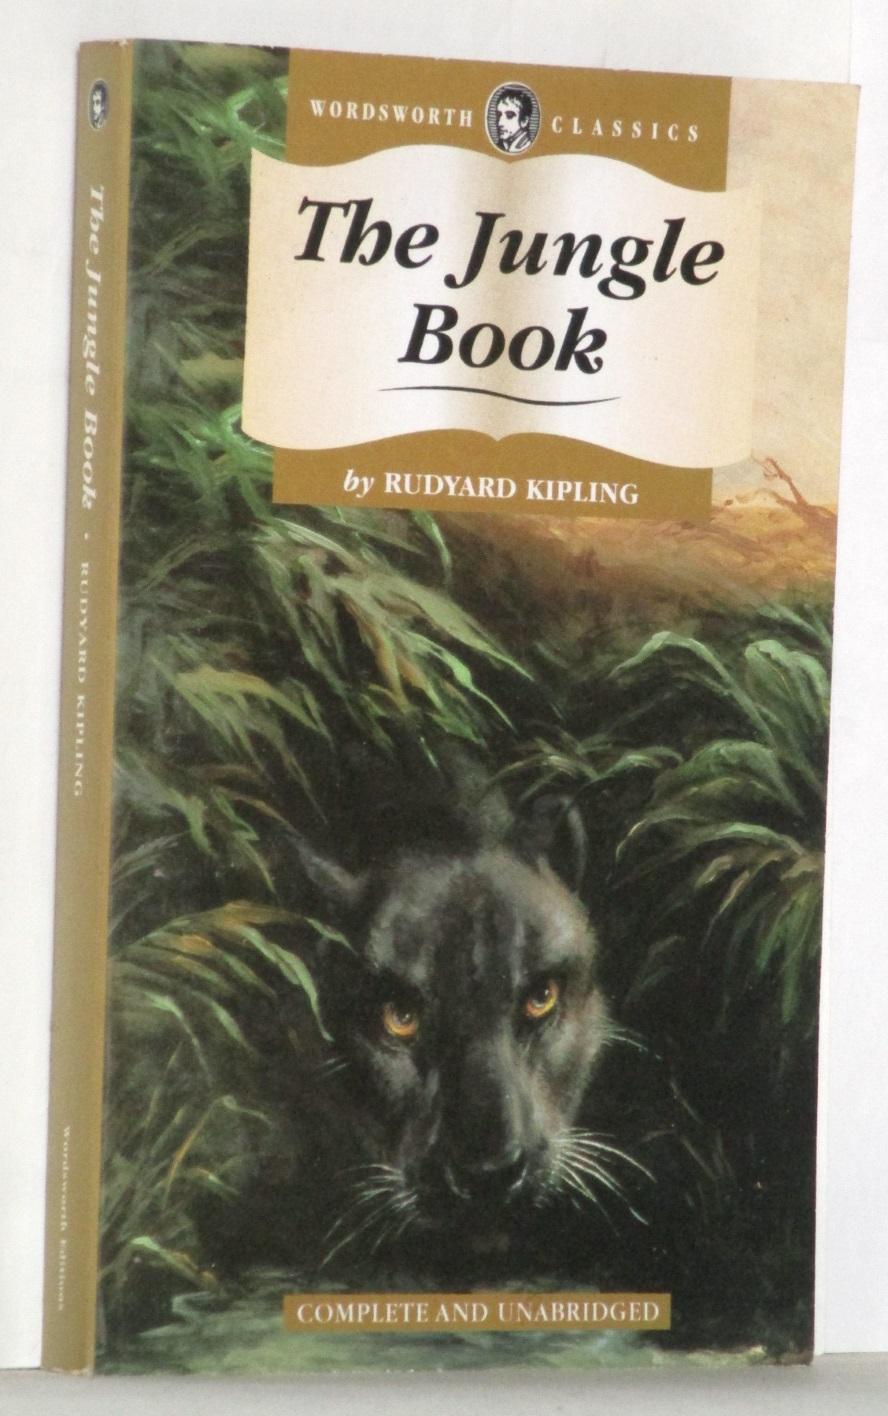 book review of the jungle book by rudyard kipling